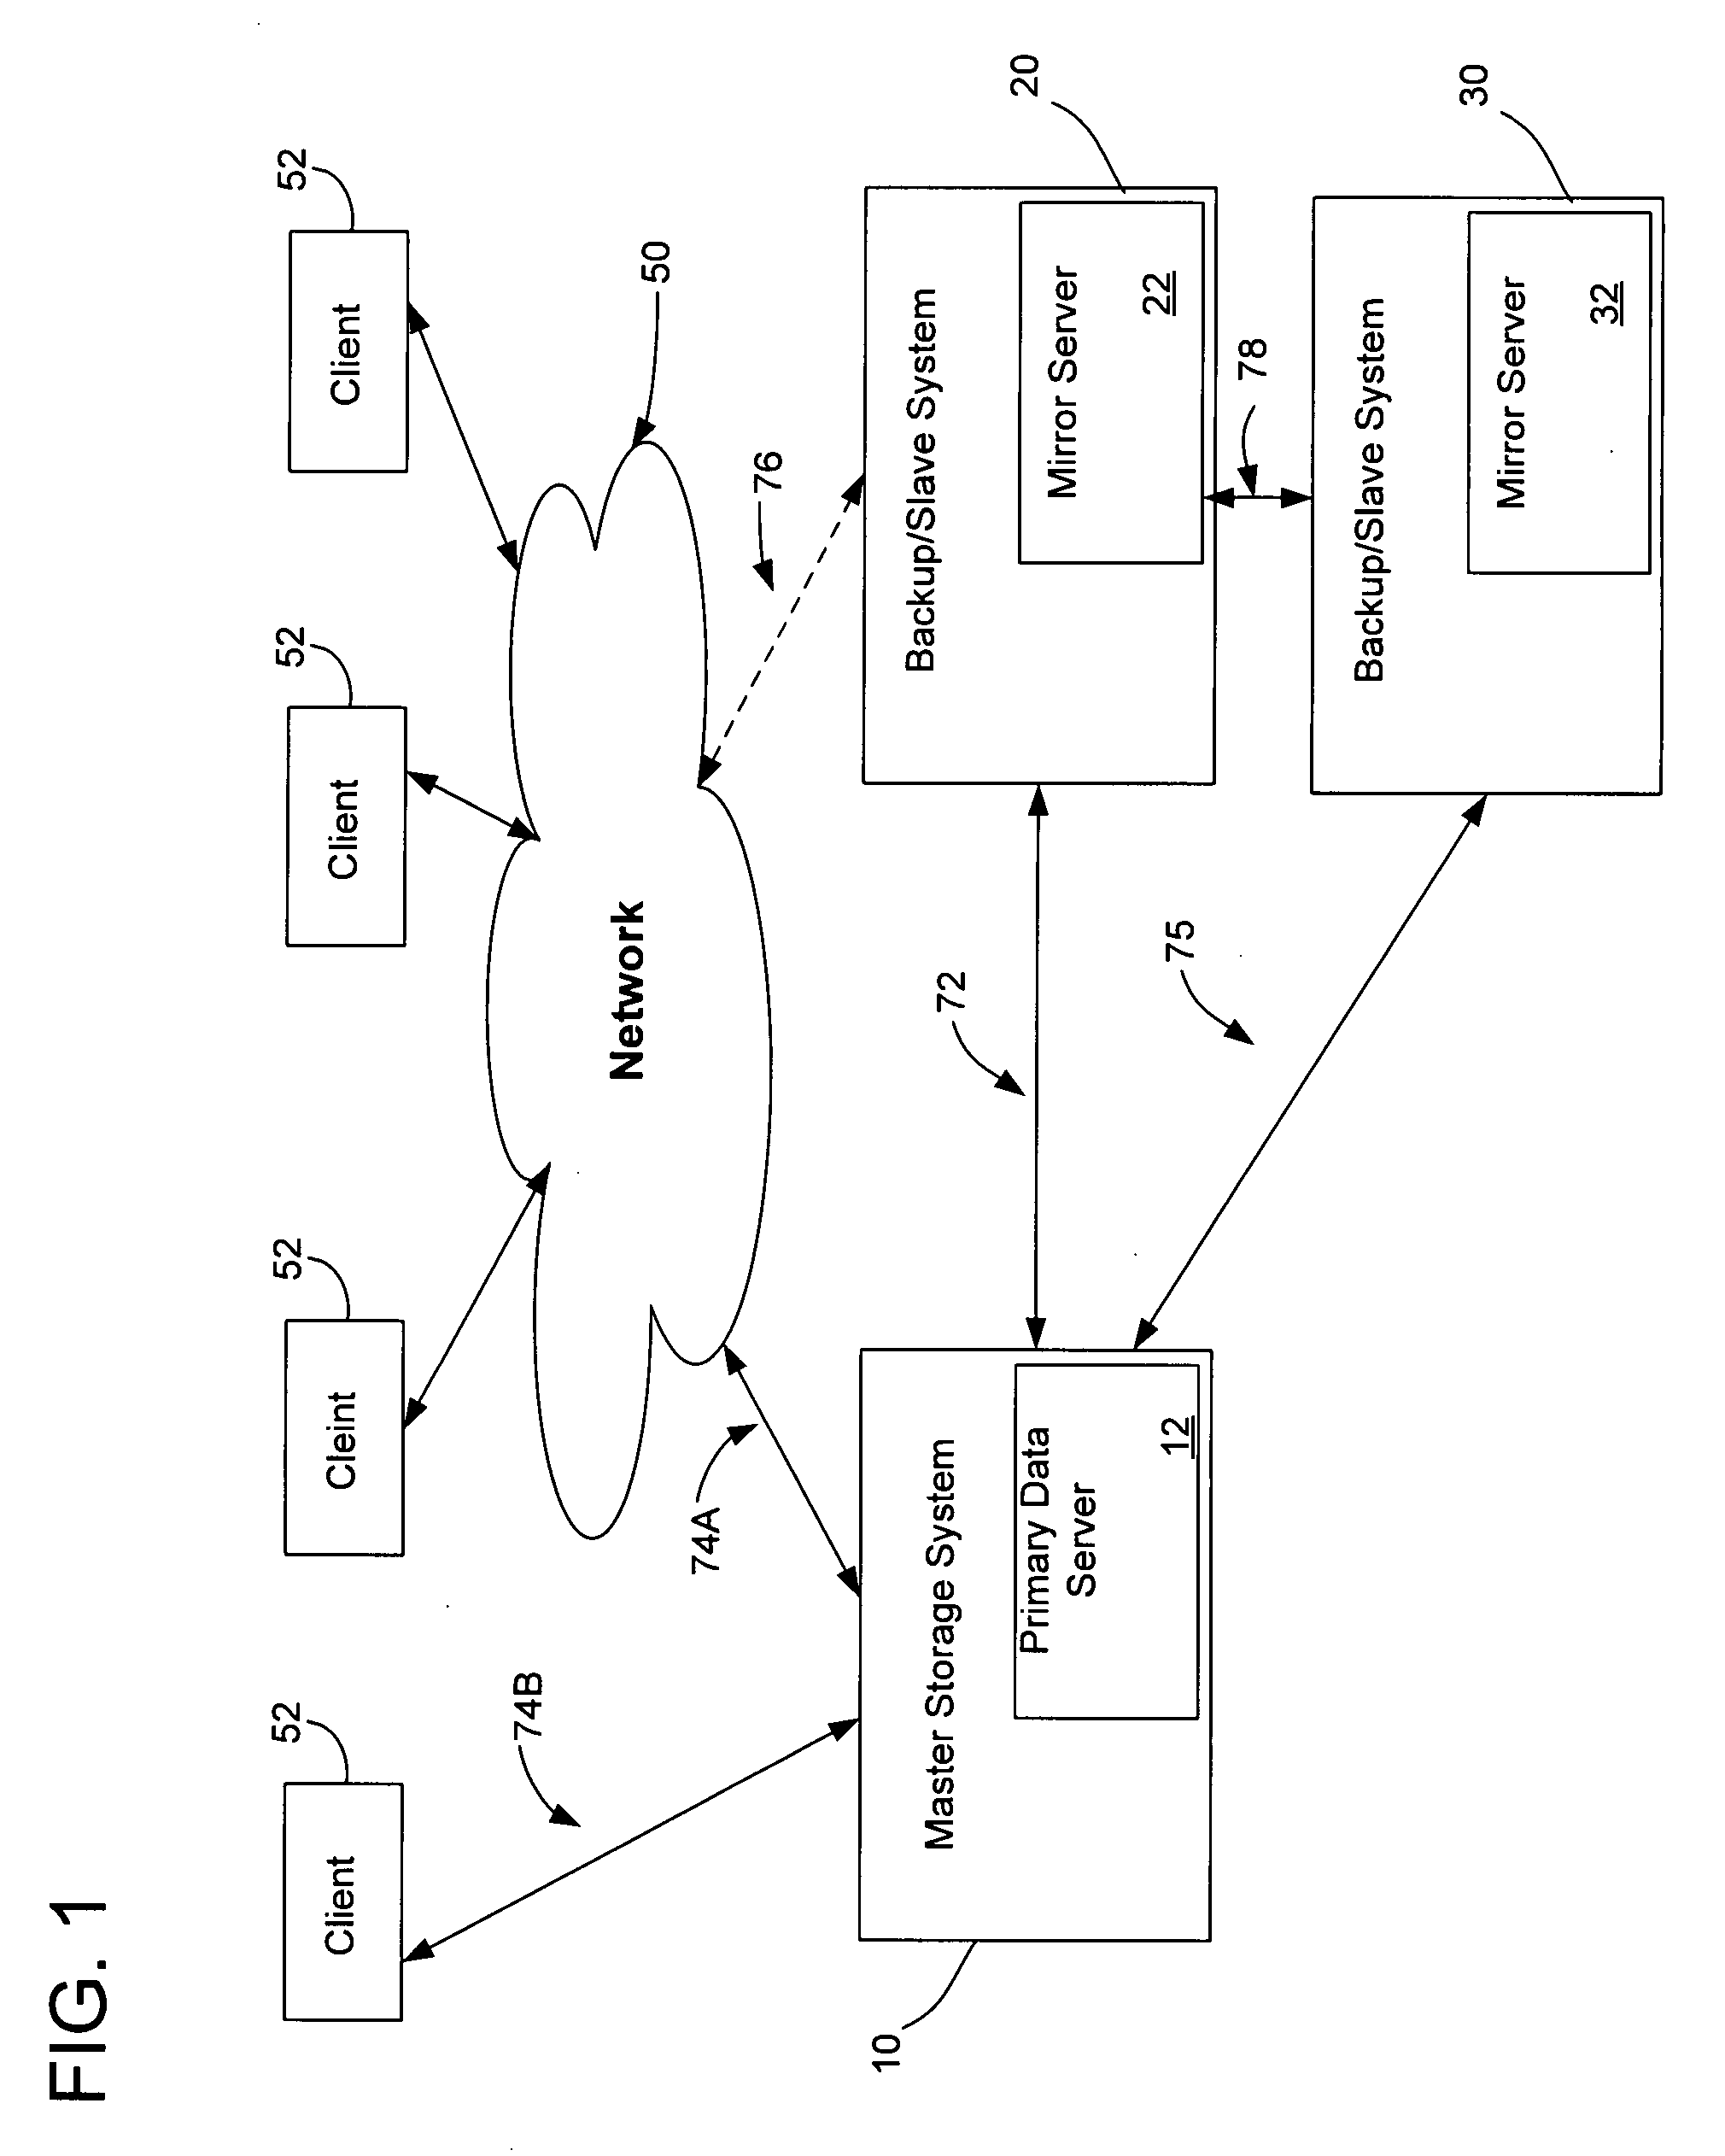 System method and circuit for differential mirroring of data